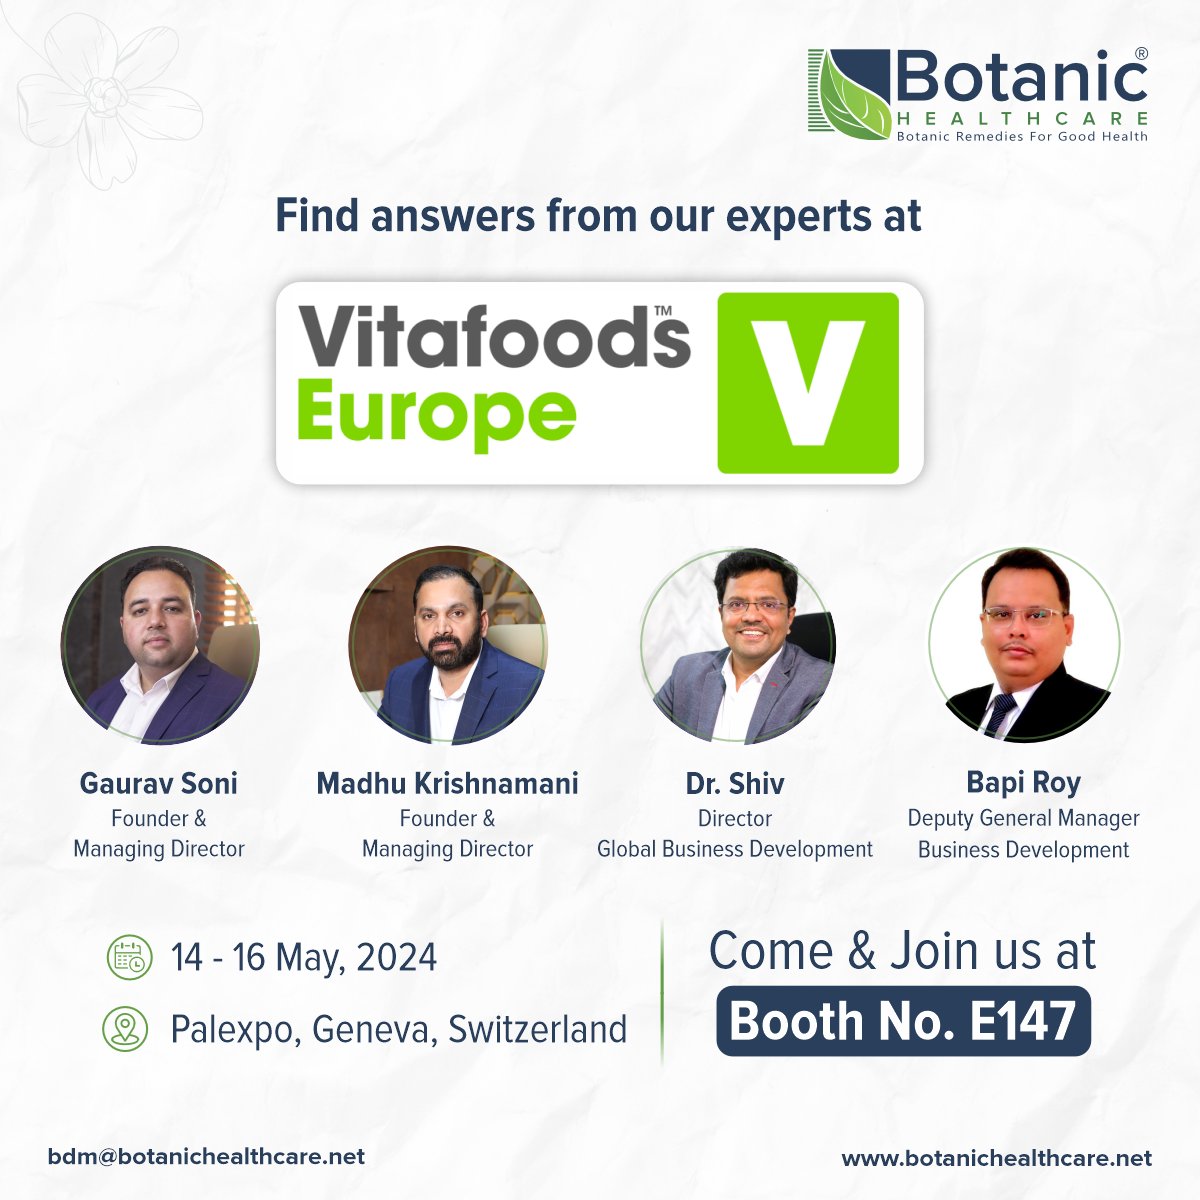 We are leading the way in showcasing our innovative natural products. The team of founders and directors will be available at Booth E147, eager to engage with attendees and share their vision for a healthier, more sustainable future.

#Botanichealthcare #herbalextracts